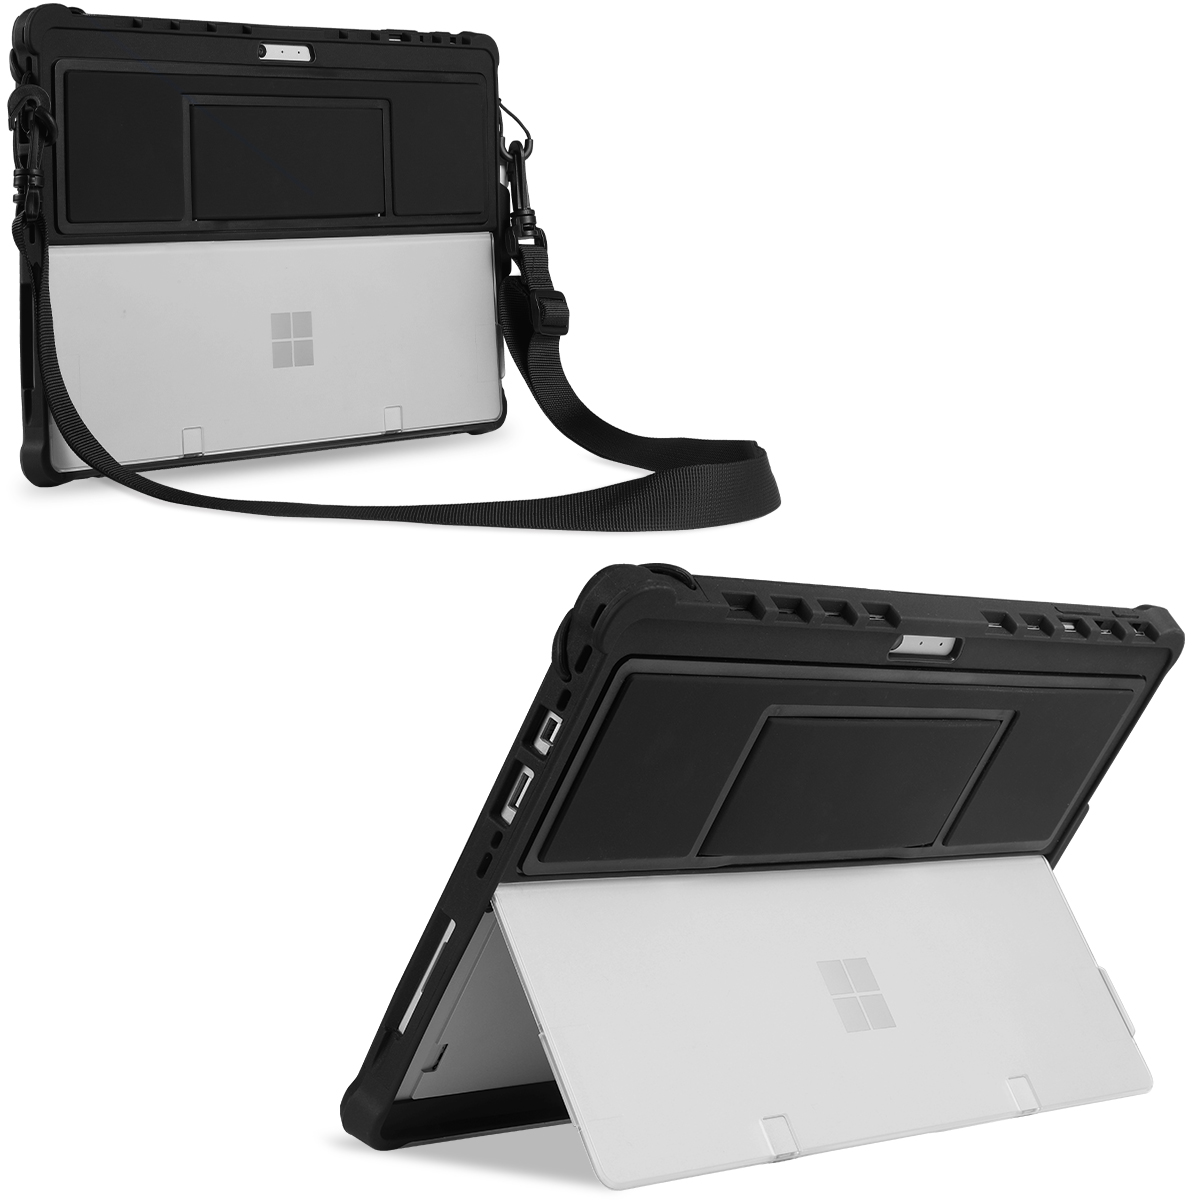 Shockproof Protective Cover Case for Microsoft Surface Pro 7/ Pro 6/ Pro 5/ Pro 4 with hand strap